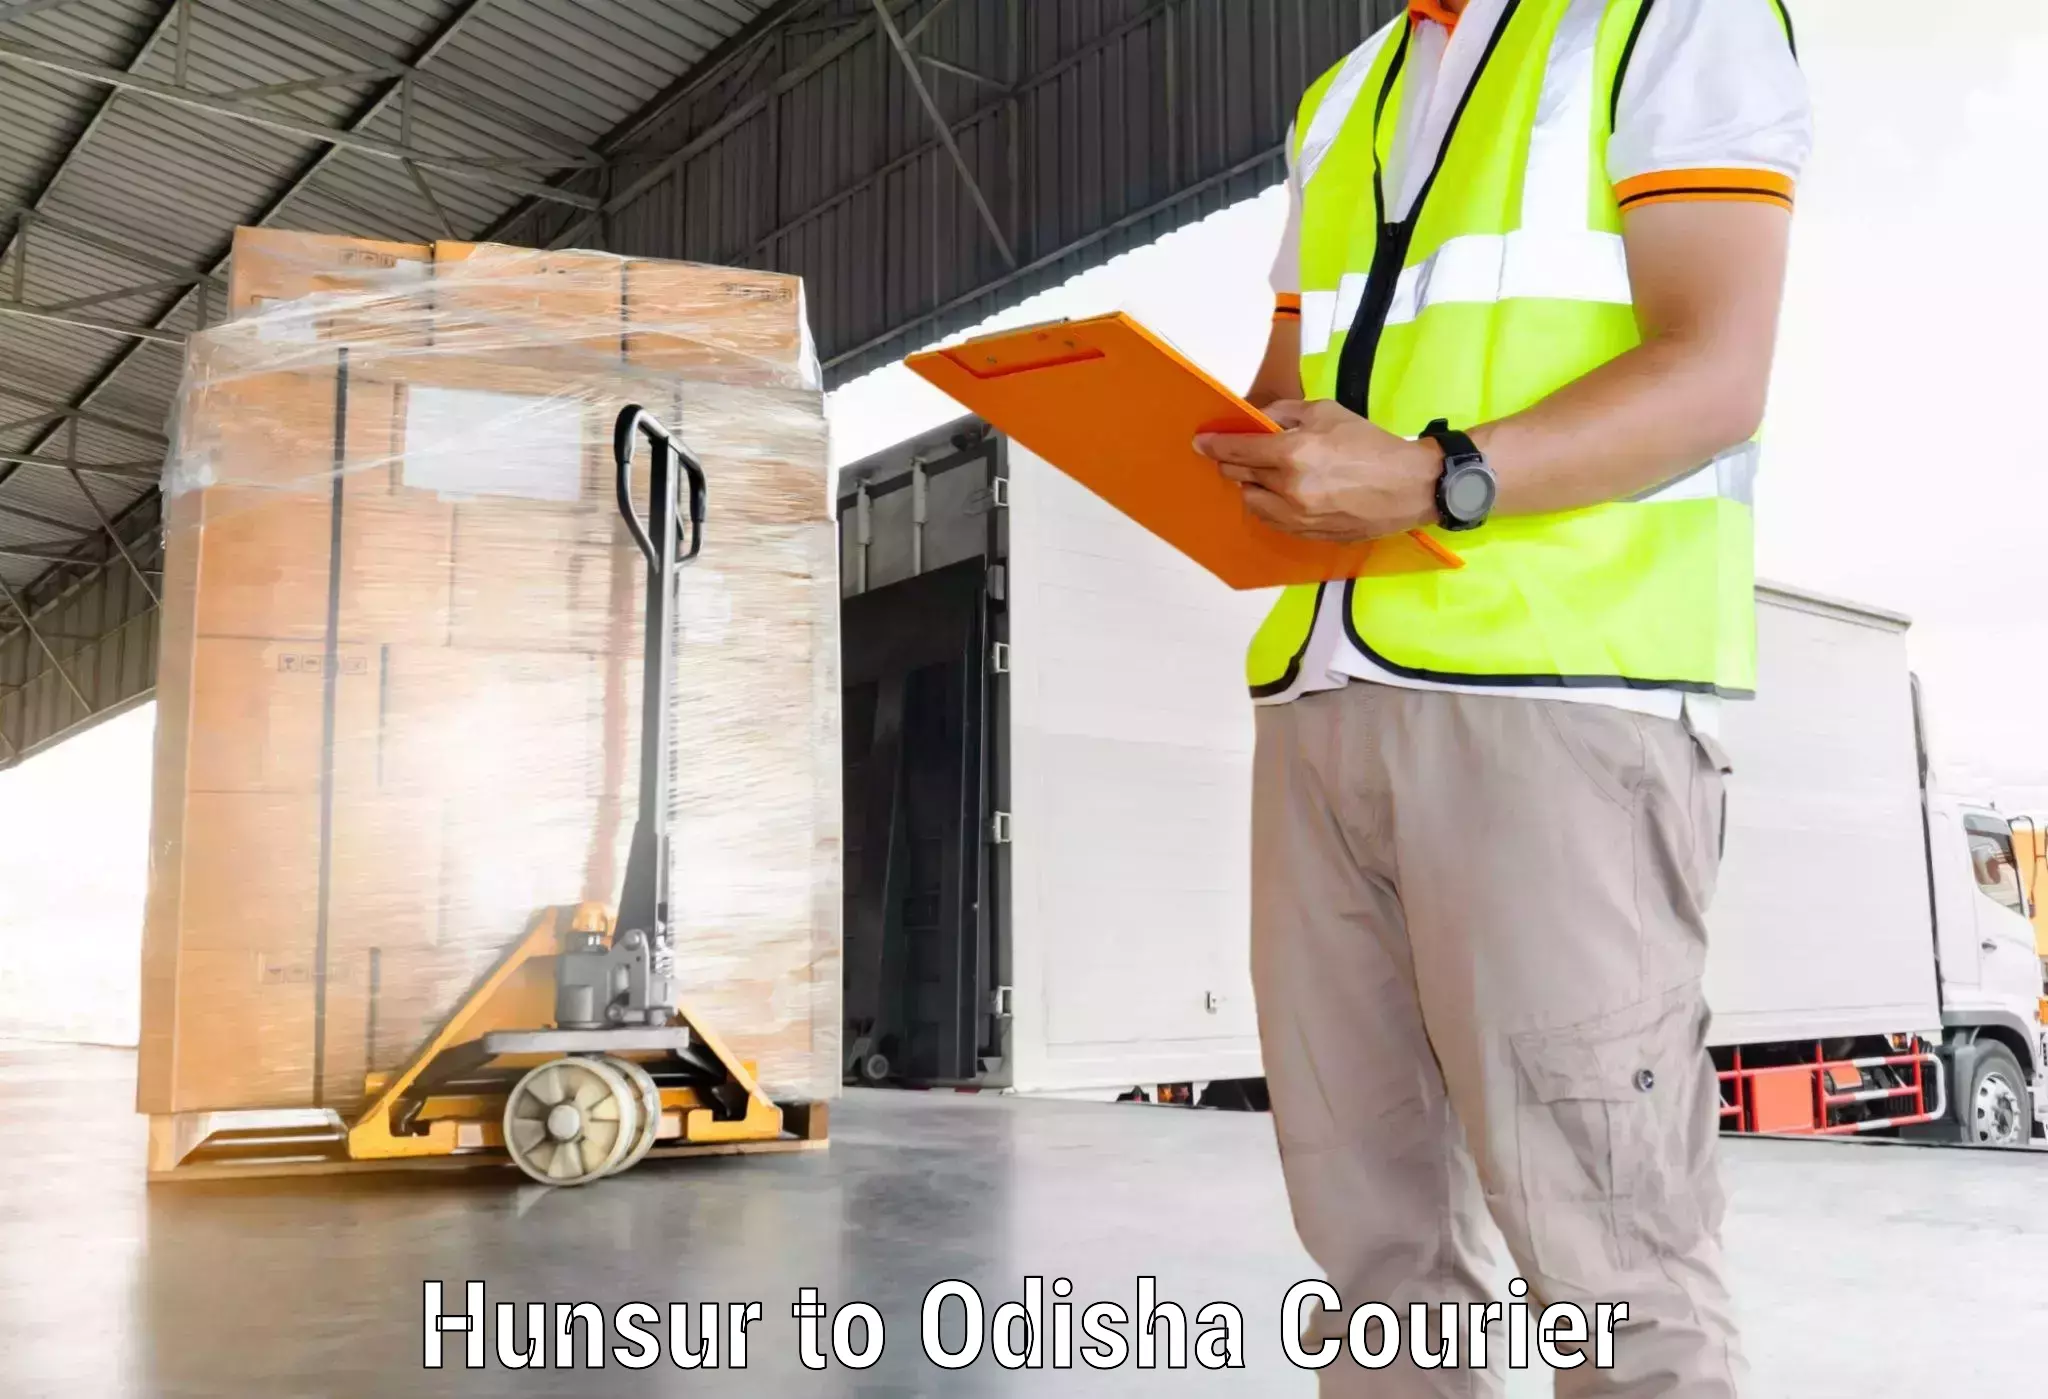 Easy access courier services in Hunsur to Ganjam